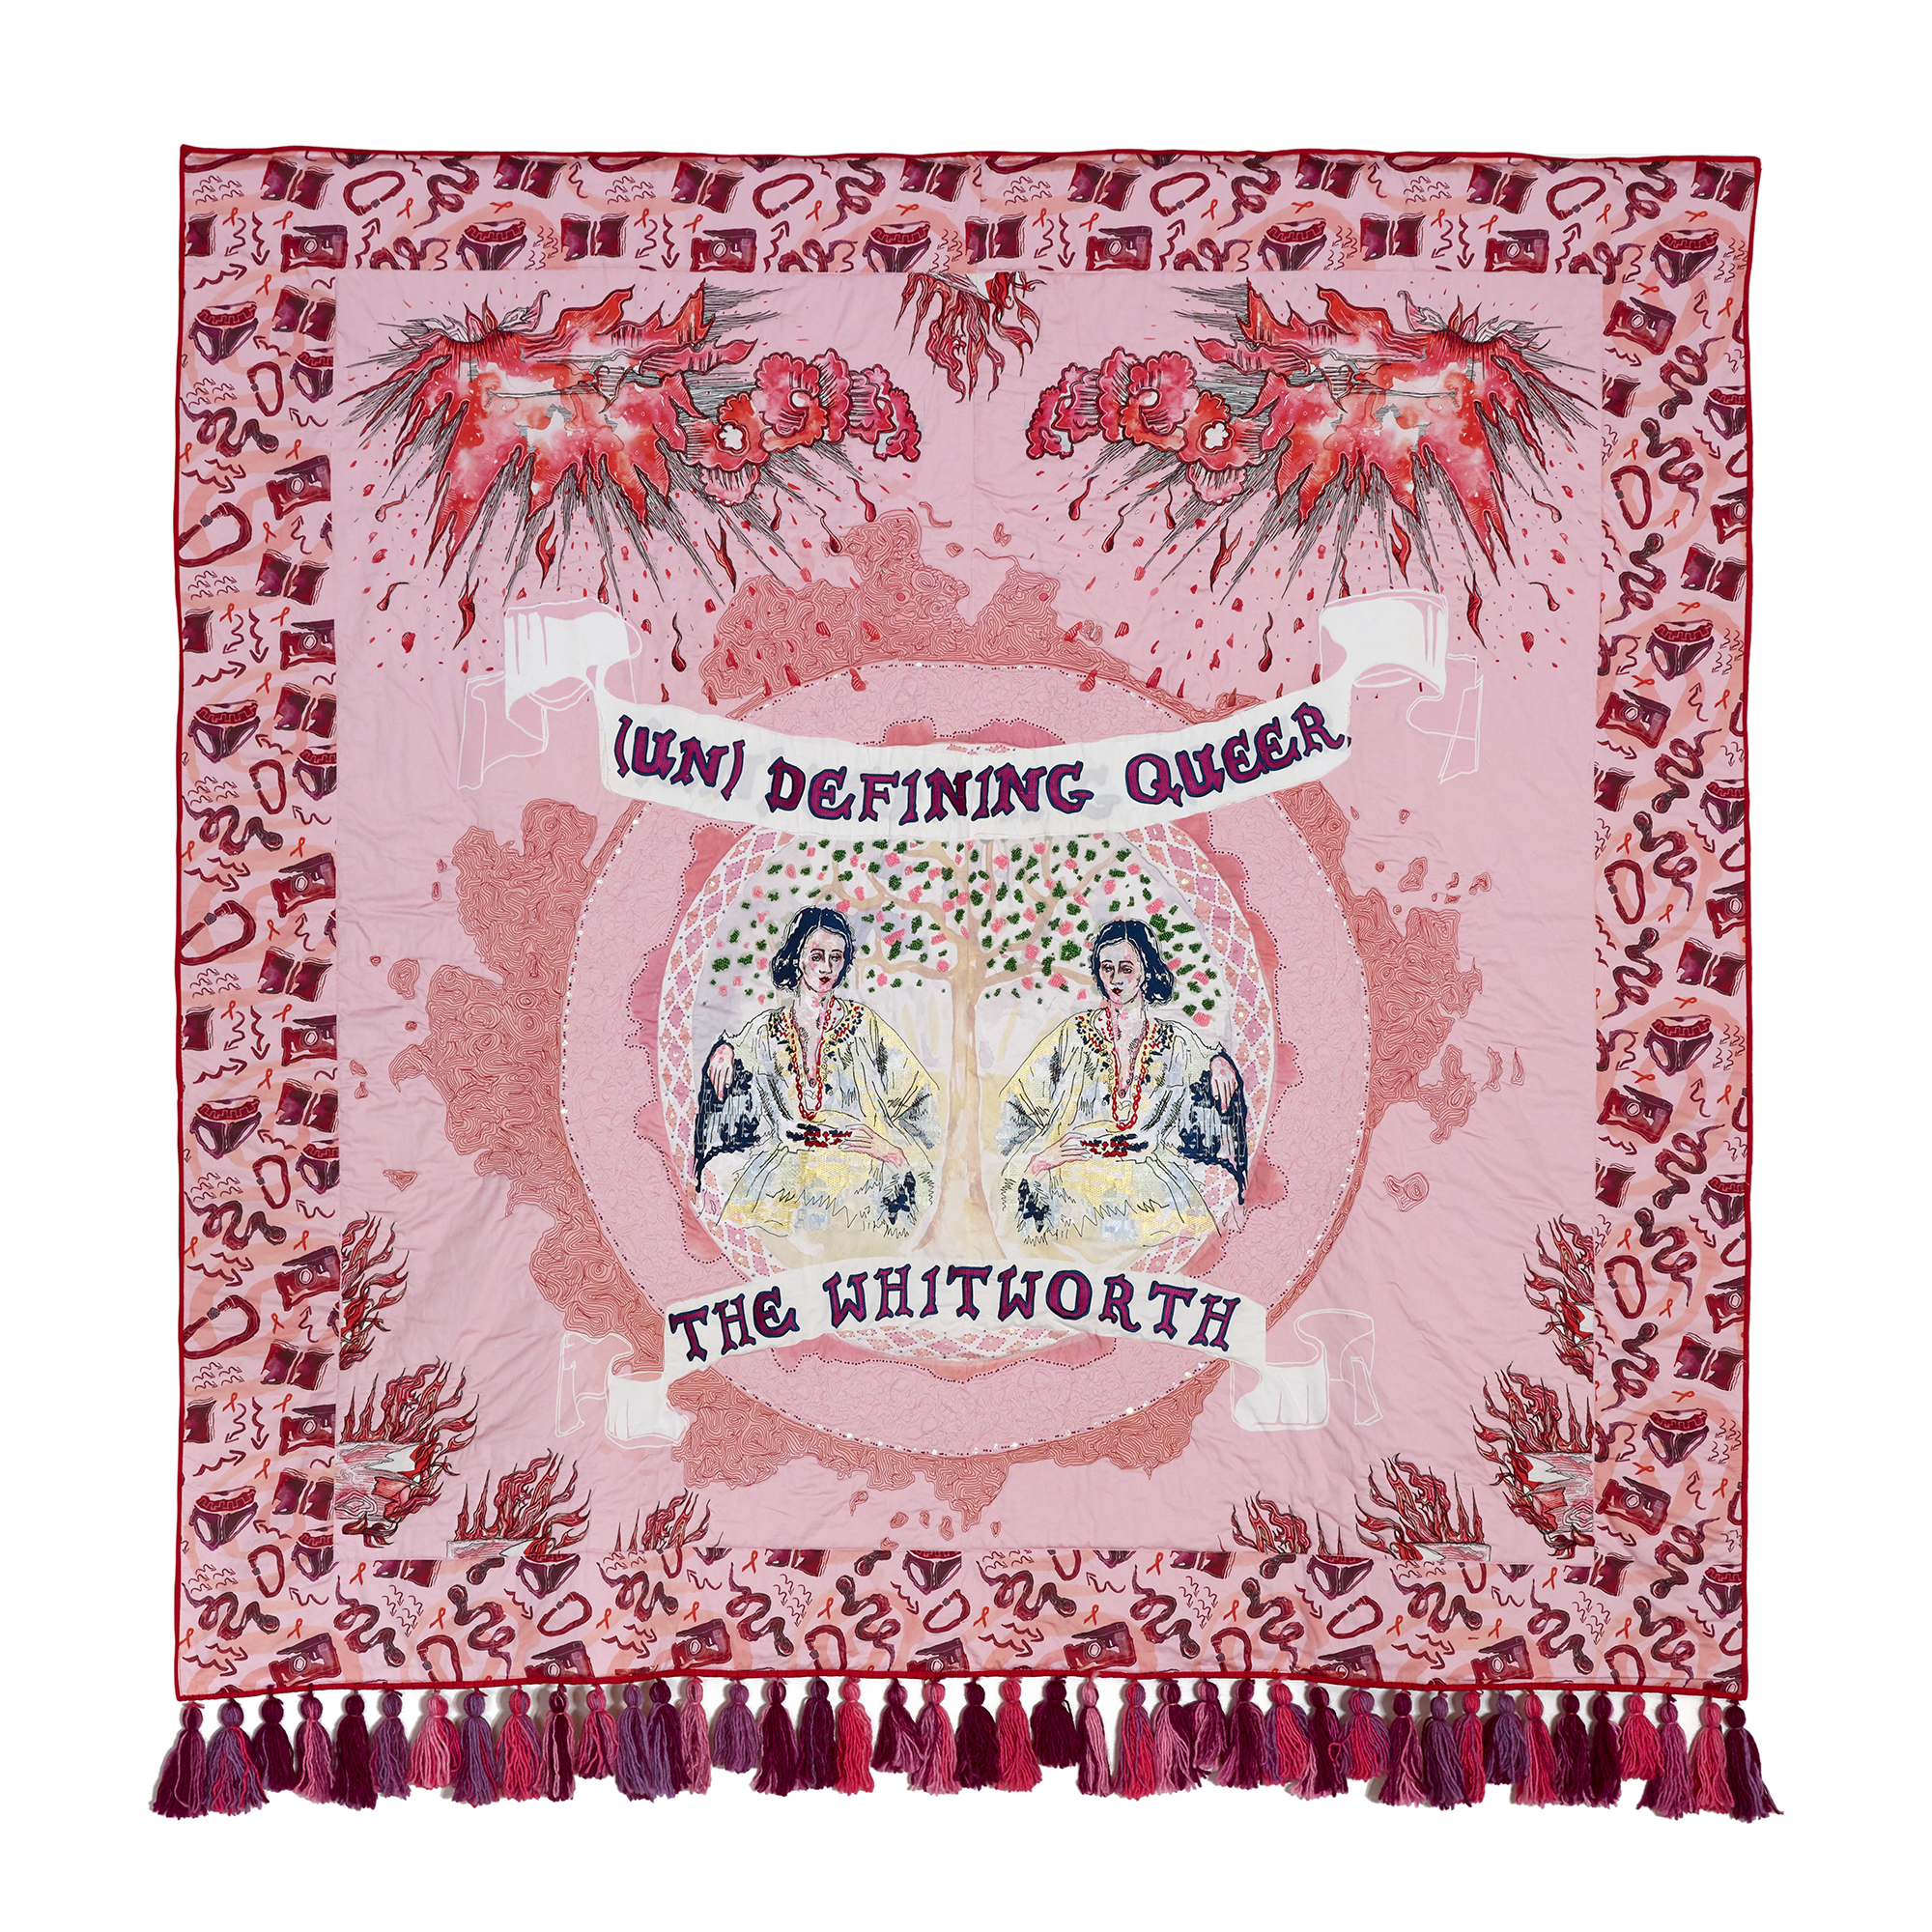 Sarah-Joy Ford (Un)Defining Queer banner quilt. Pink and red pattern design featuring two figures at the centre.